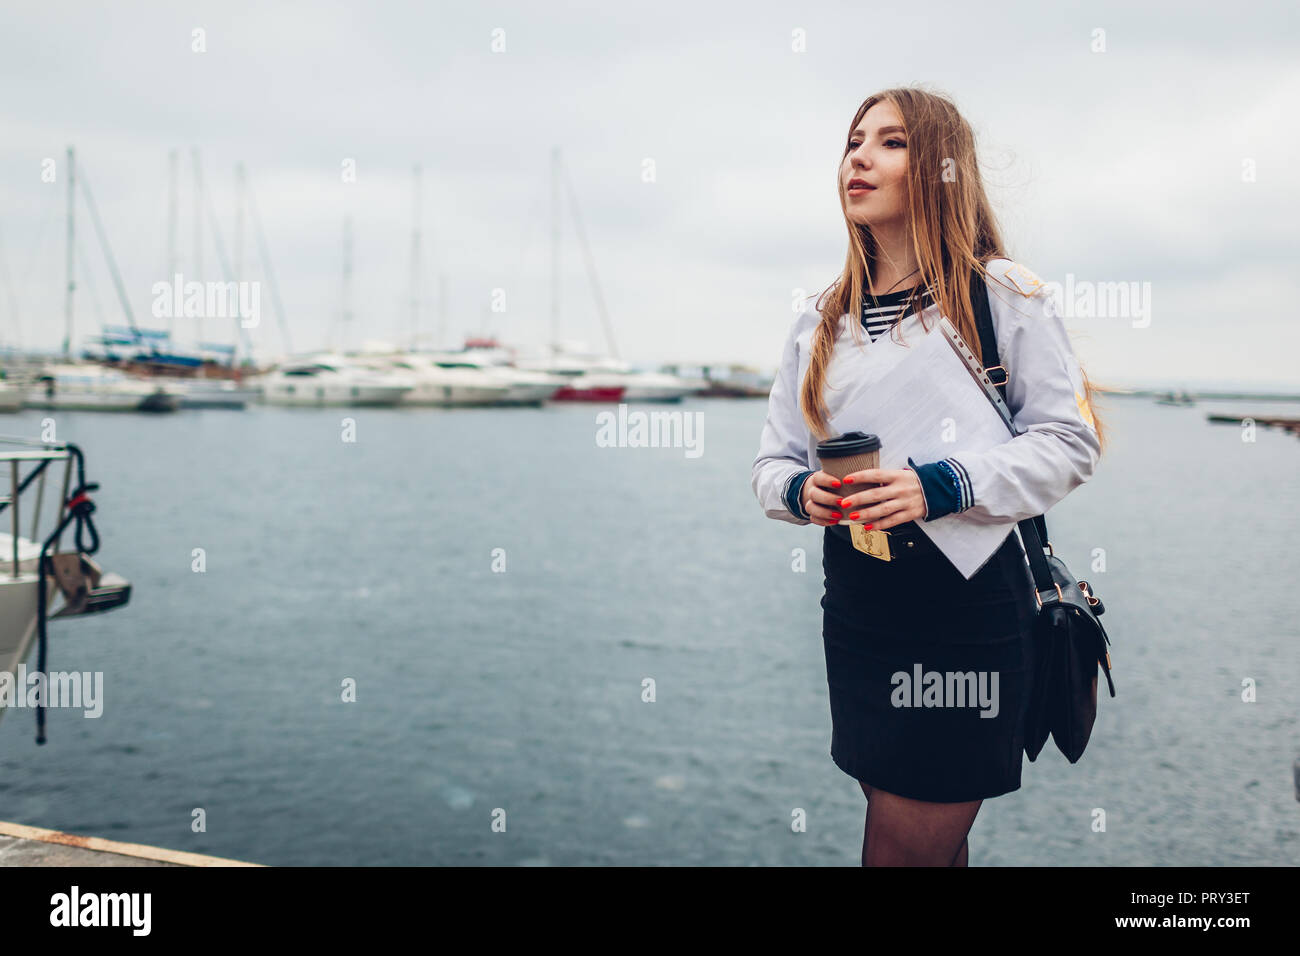 College woman student of Marine academy drinking coffee by sea wearing uniform. Girl walking in seaport of Odesa on pier Stock Photo